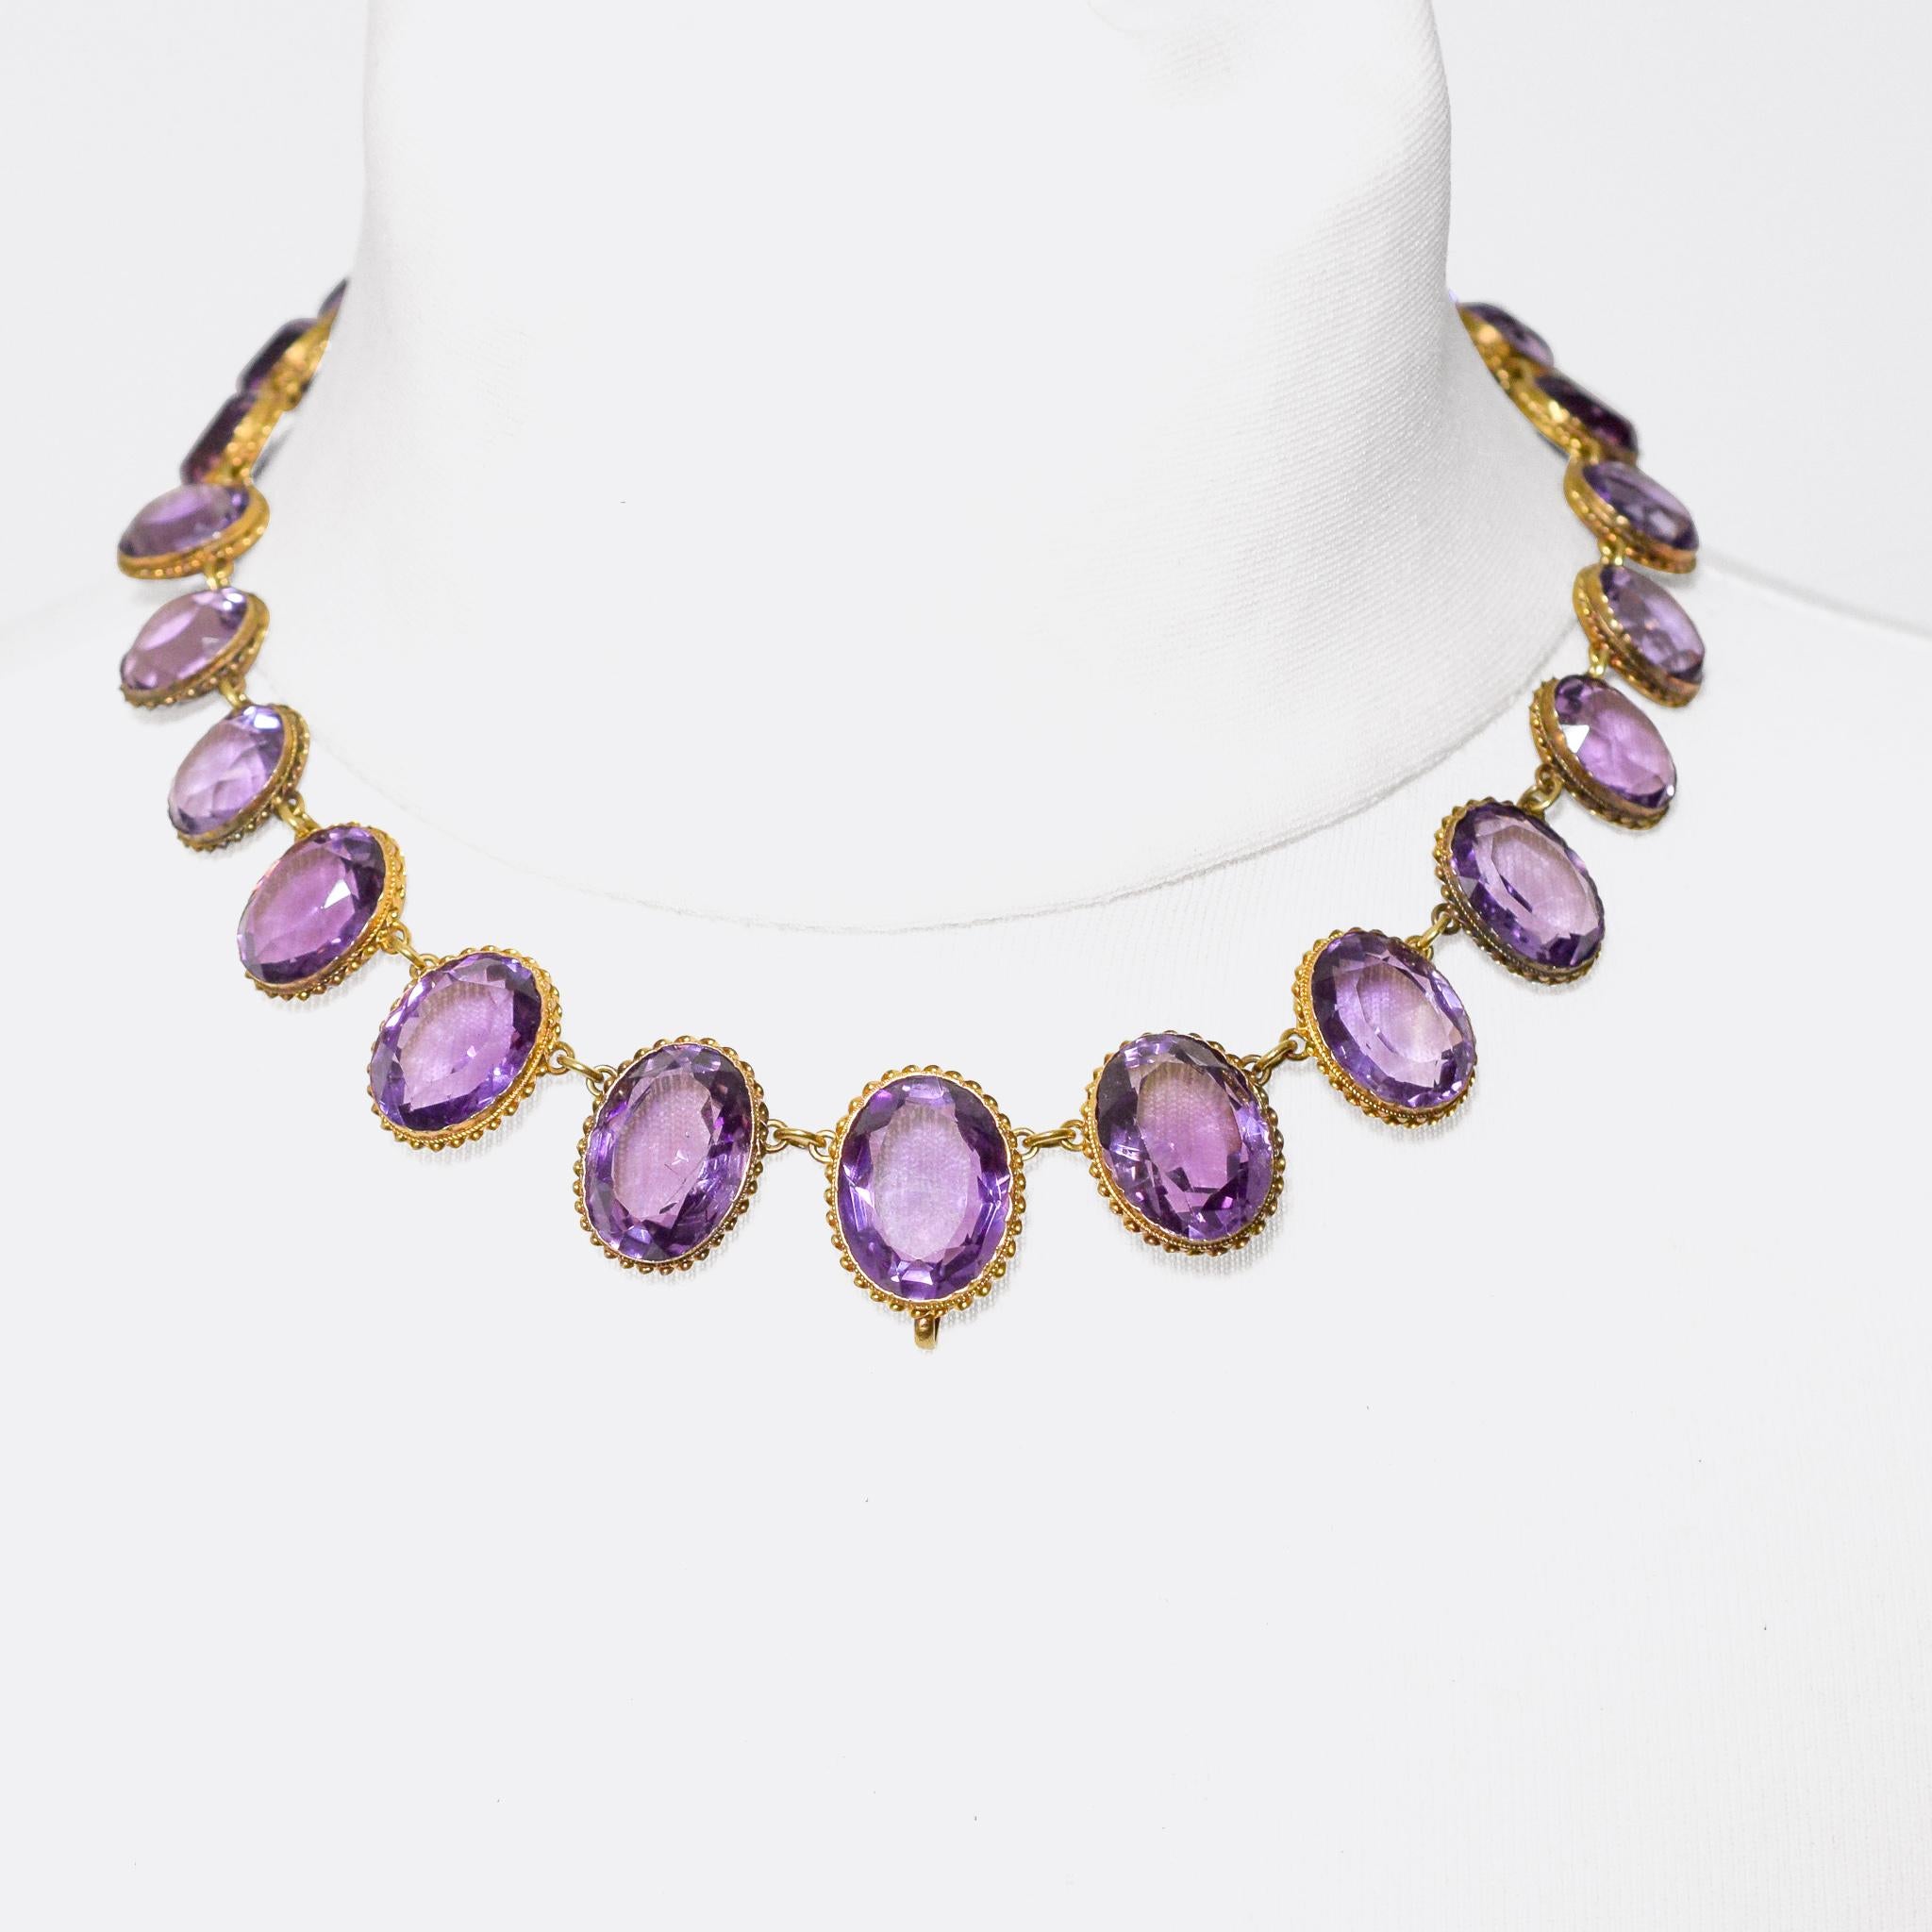 Antique Victorian Amethyst Riviére Necklace and Earrings Suite 4